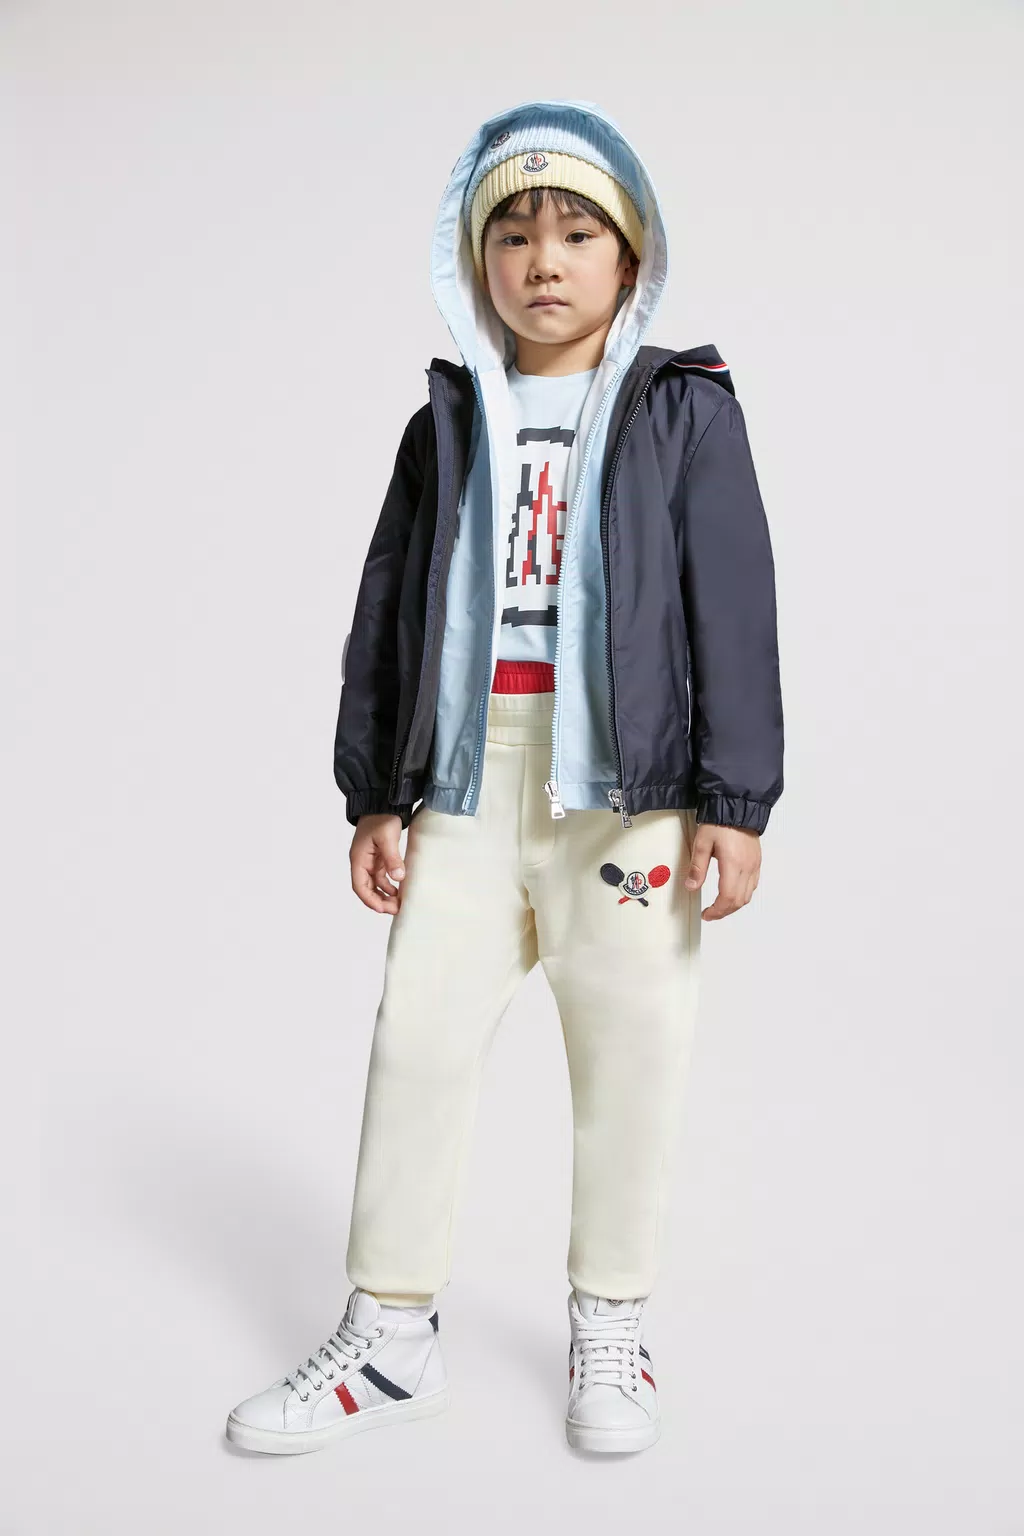 Outerwear for Boys - Winter Coats, Down Jackets & Vests | Moncler